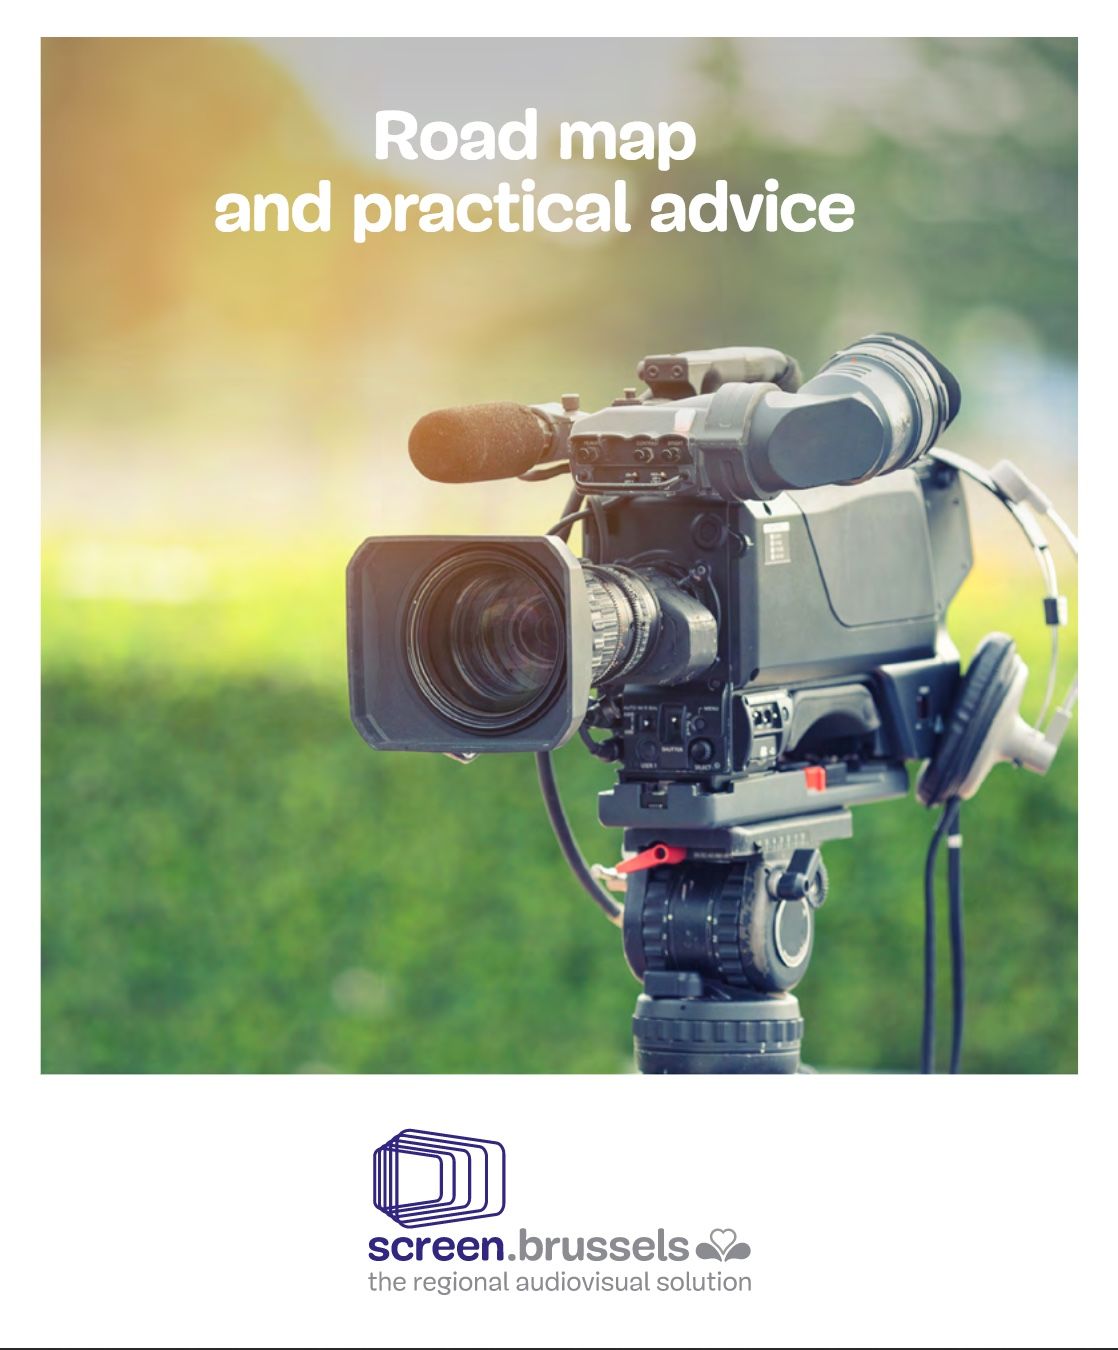 New guide for sustainable filming